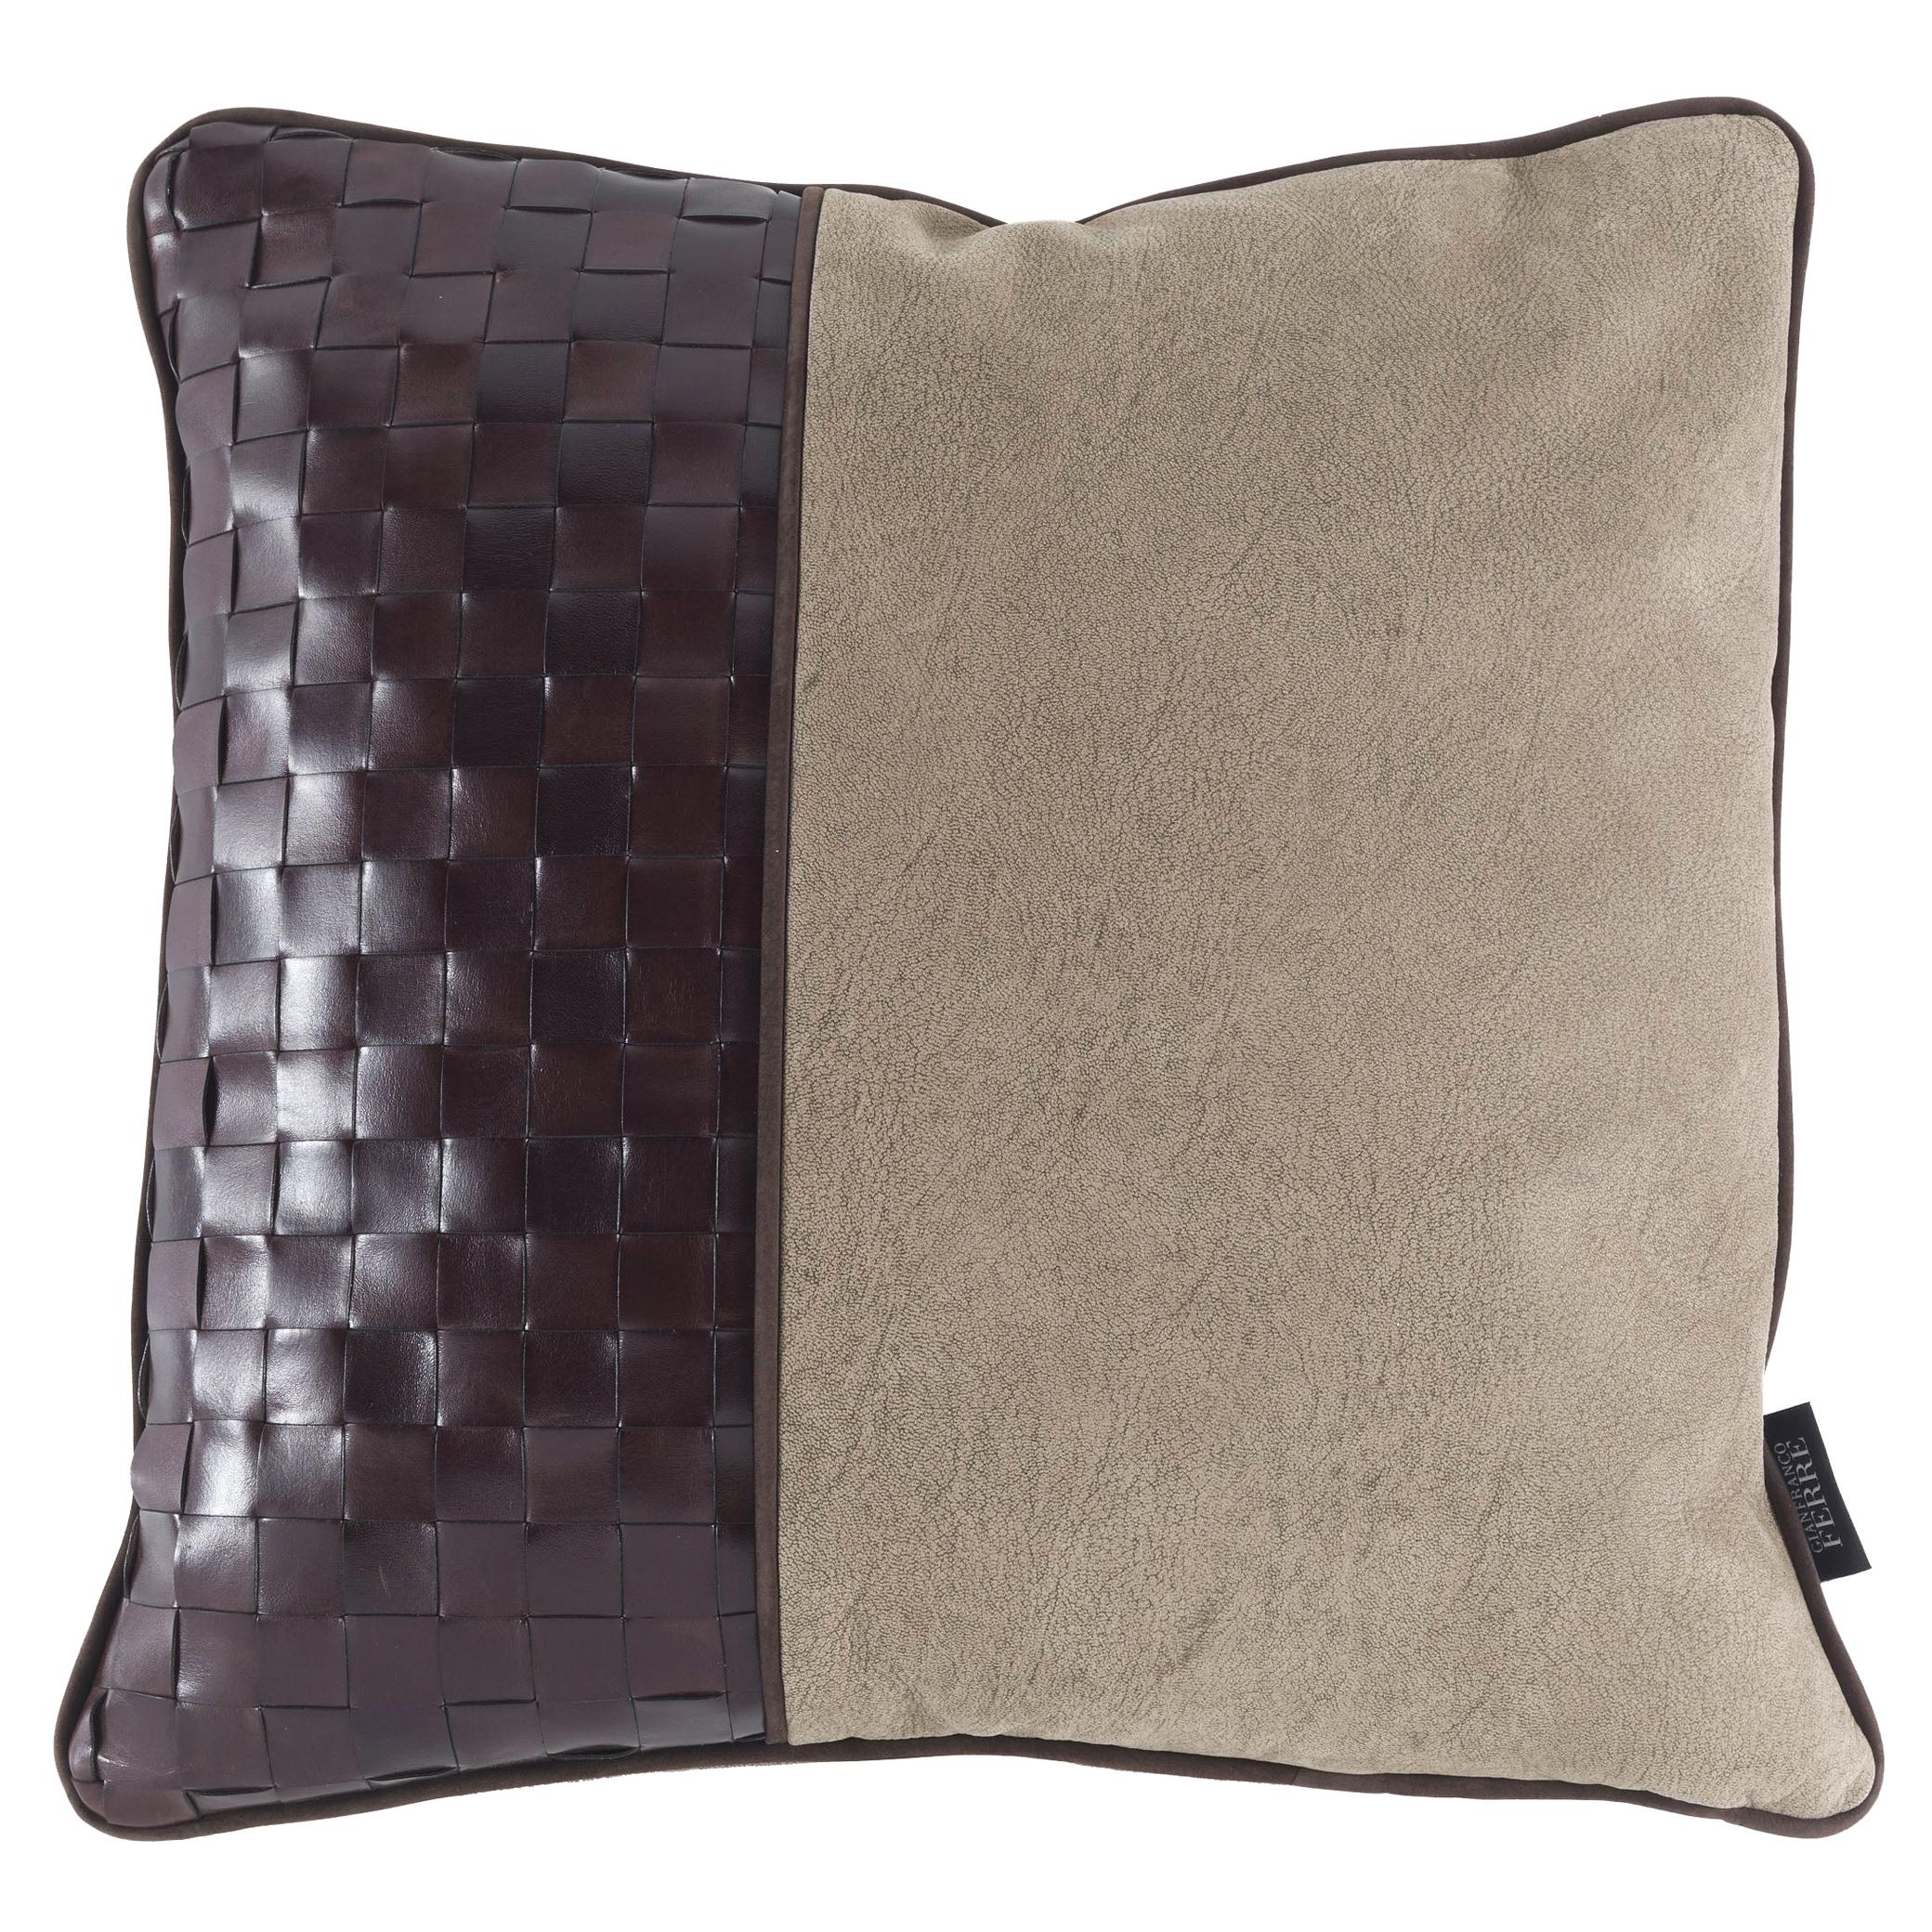 21st Century Tribeca _4 Decorative Cushion in Leather by Gianfranco Ferré Home